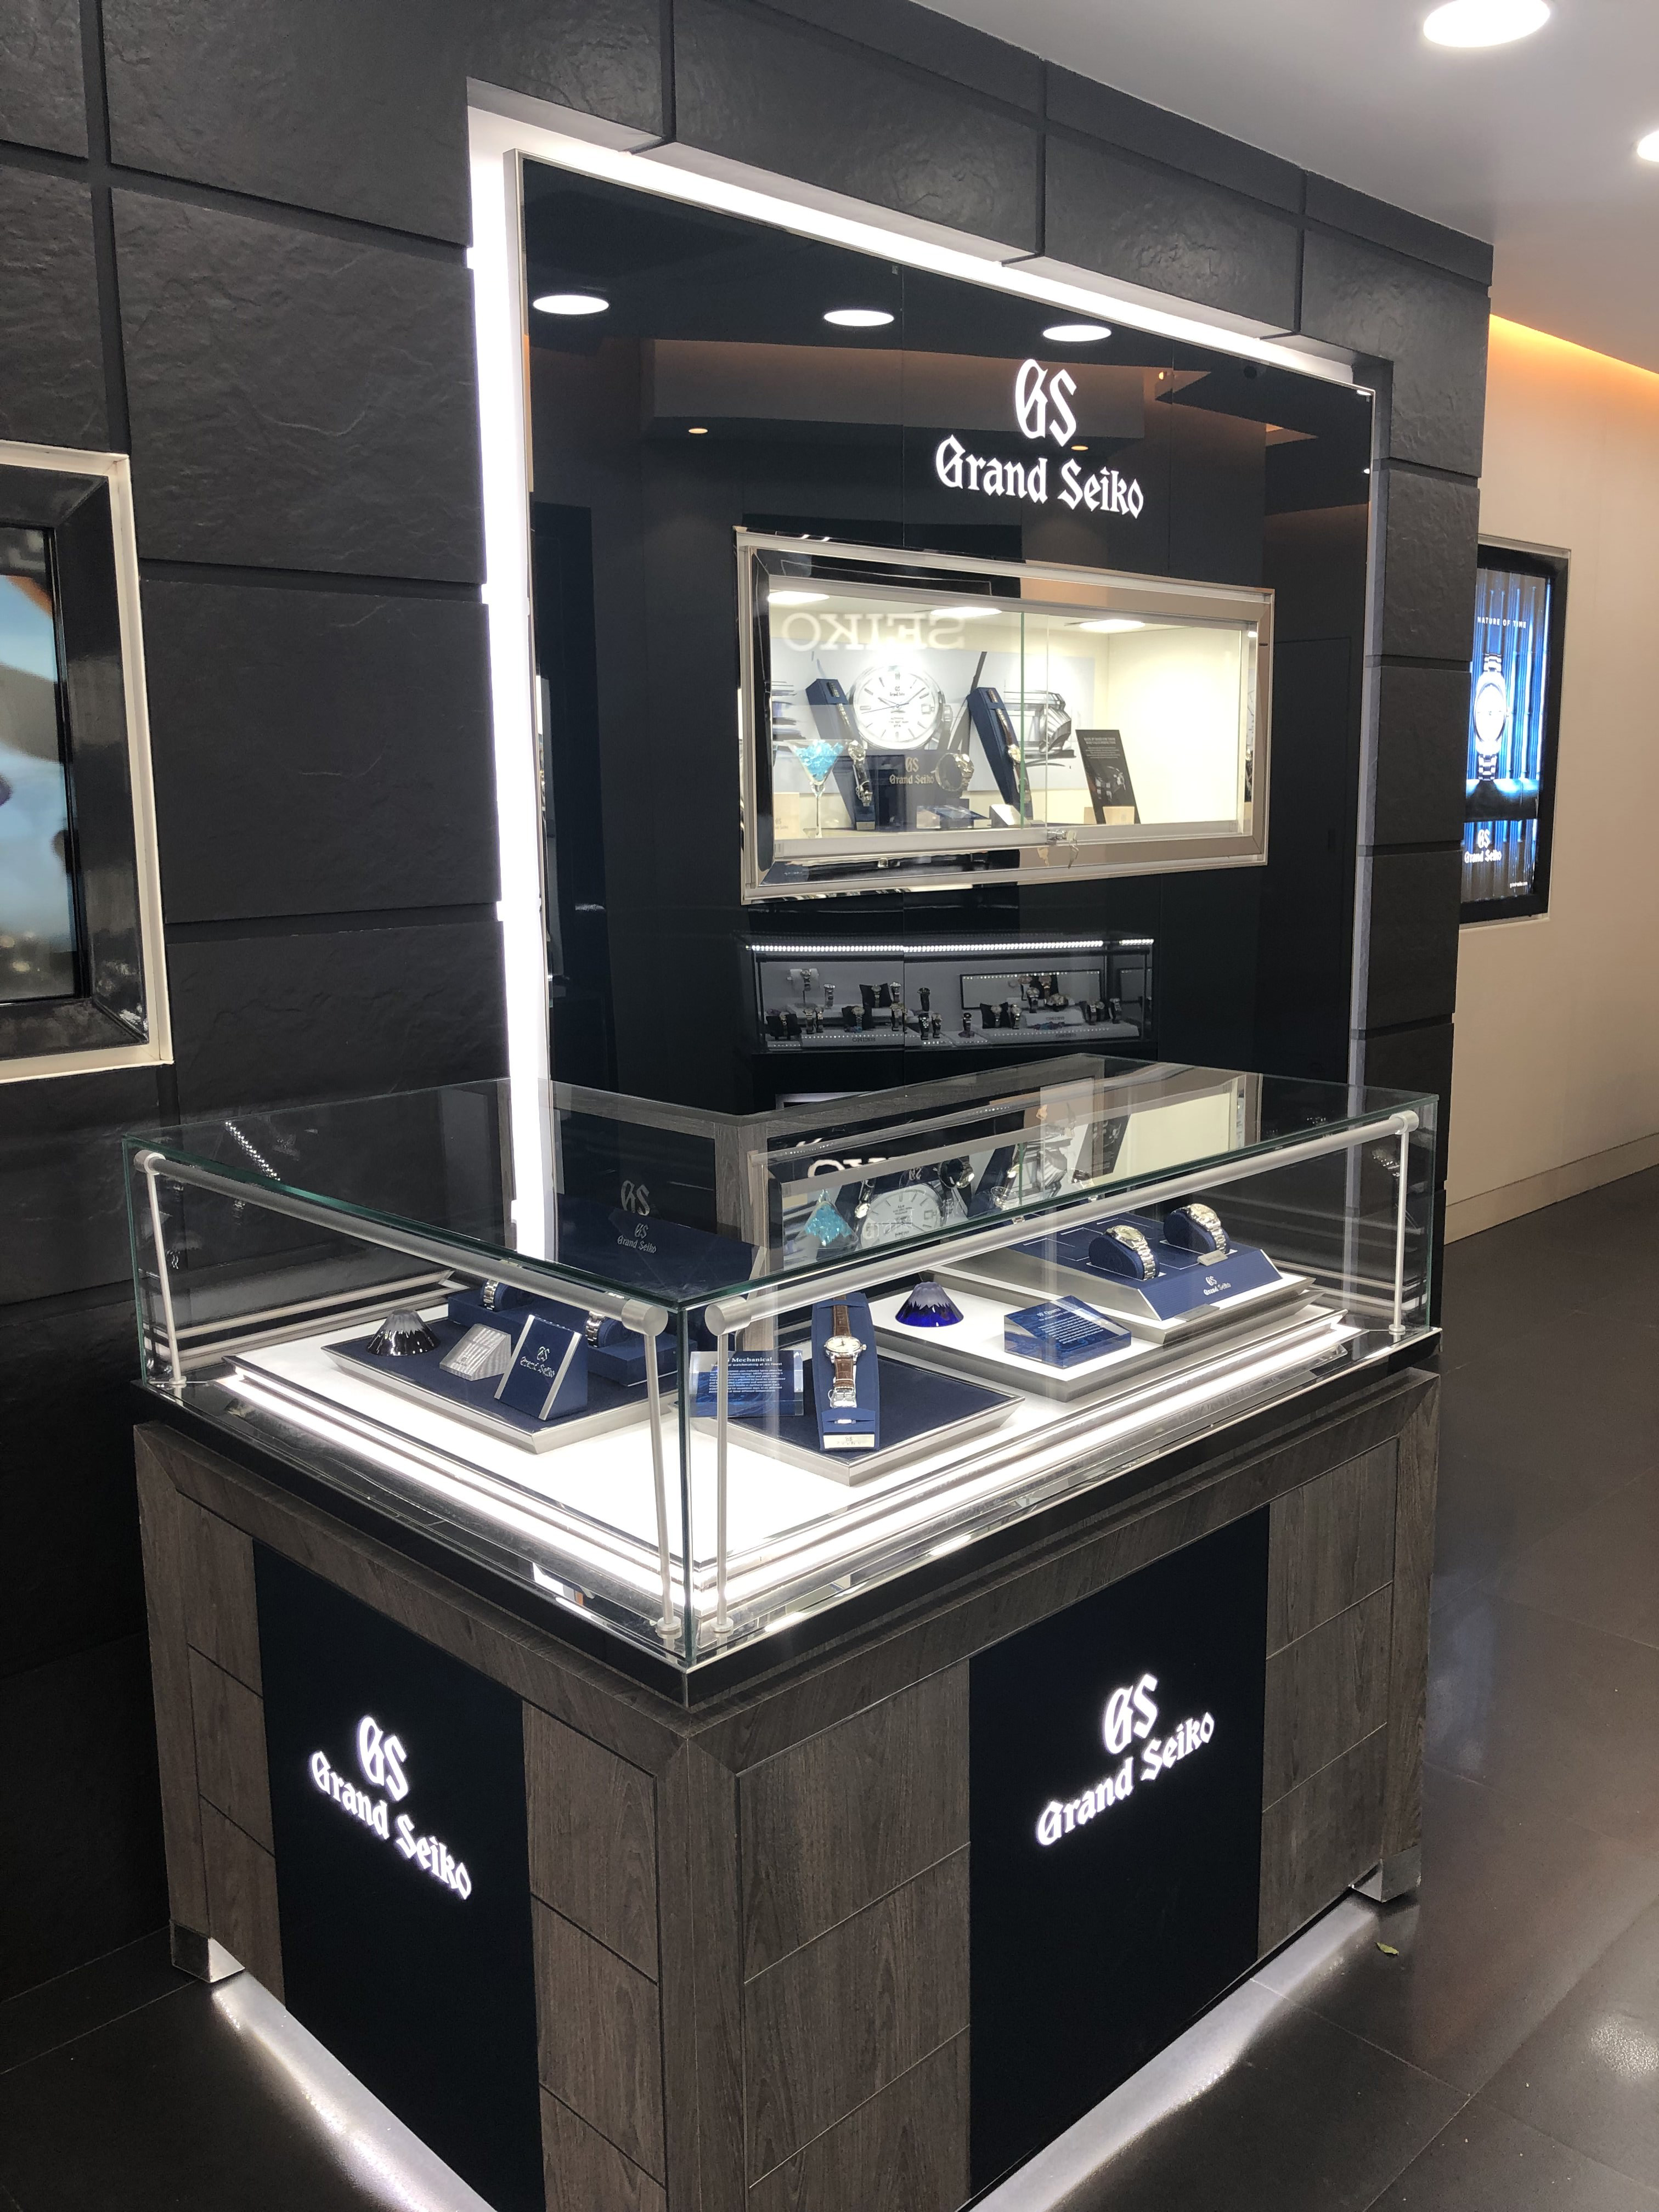 The Grand Seiko boutique offers the best luxury expereince